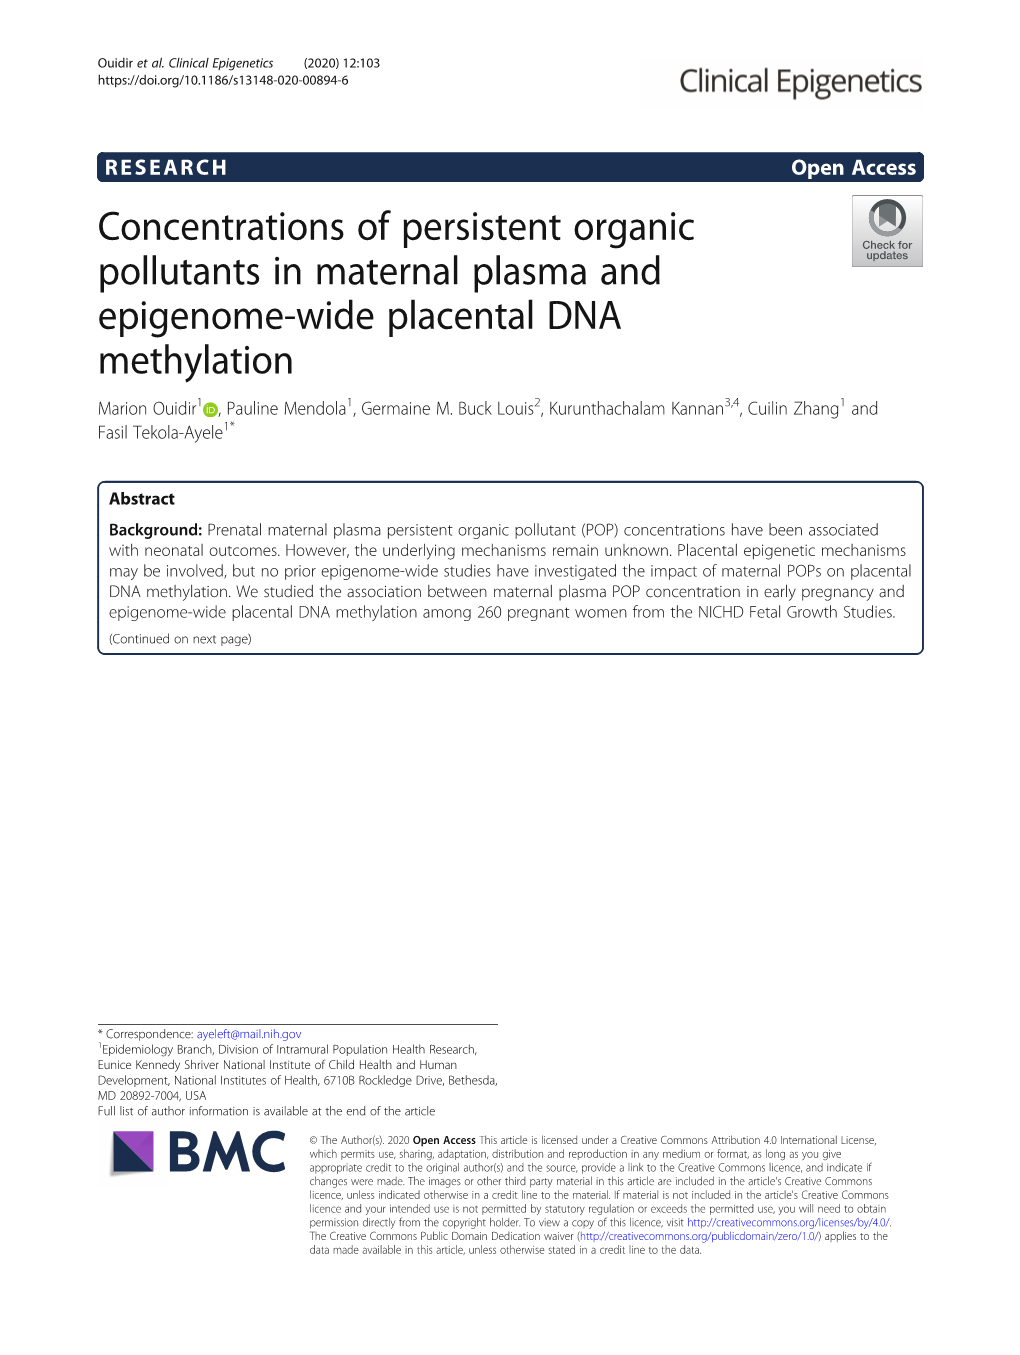 Concentrations of Persistent Organic Pollutants in Maternal Plasma and Epigenome-Wide Placental DNA Methylation Marion Ouidir1 , Pauline Mendola1, Germaine M